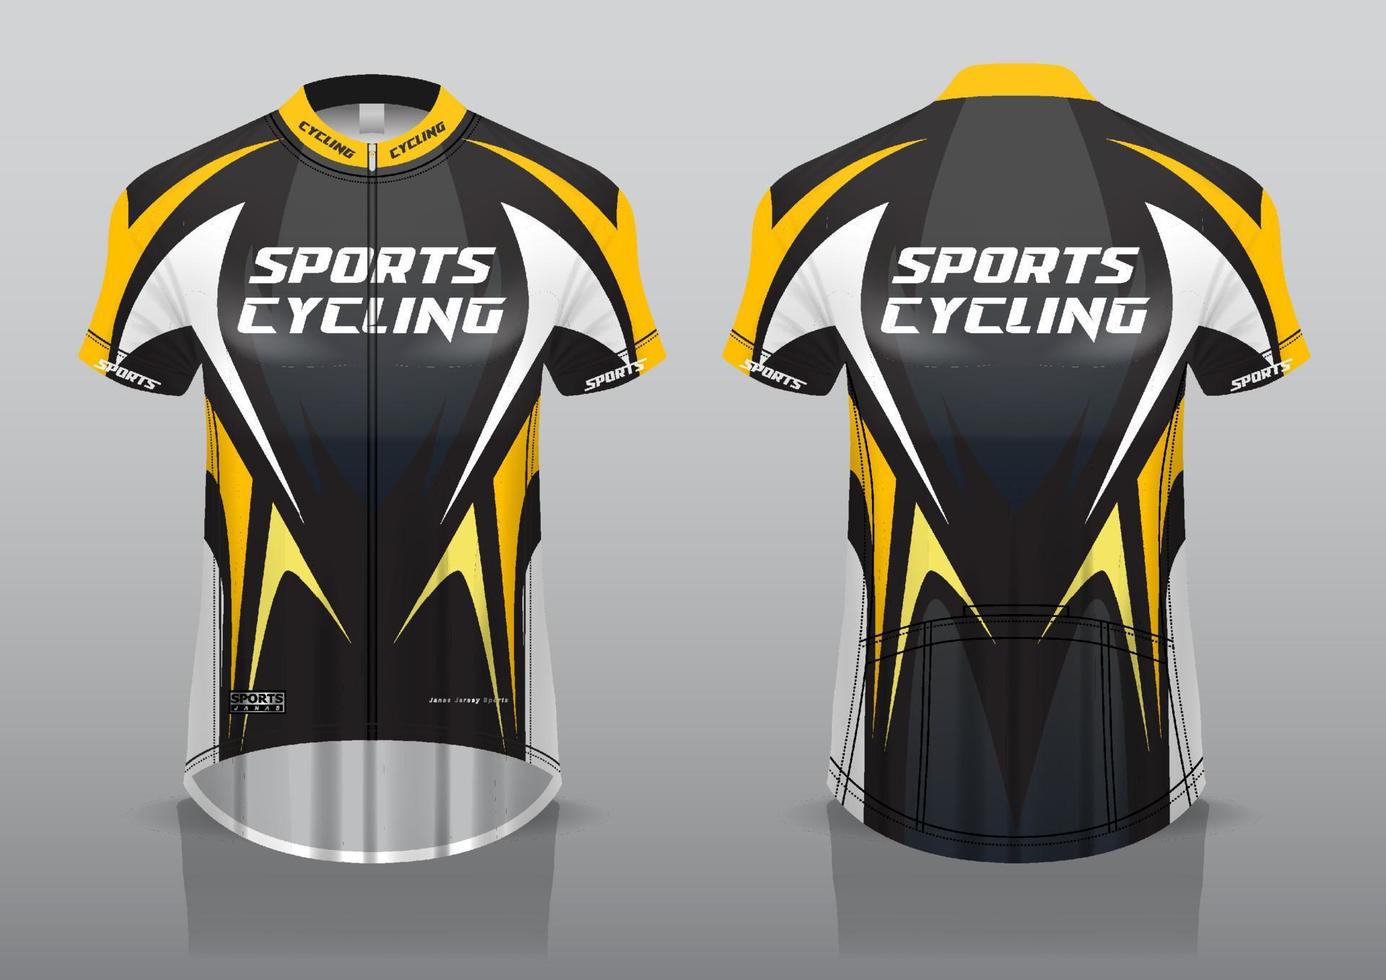 jersey design for cycling, front and back view, and easy to edit and print on fabric, sportswear for cycling teams vector